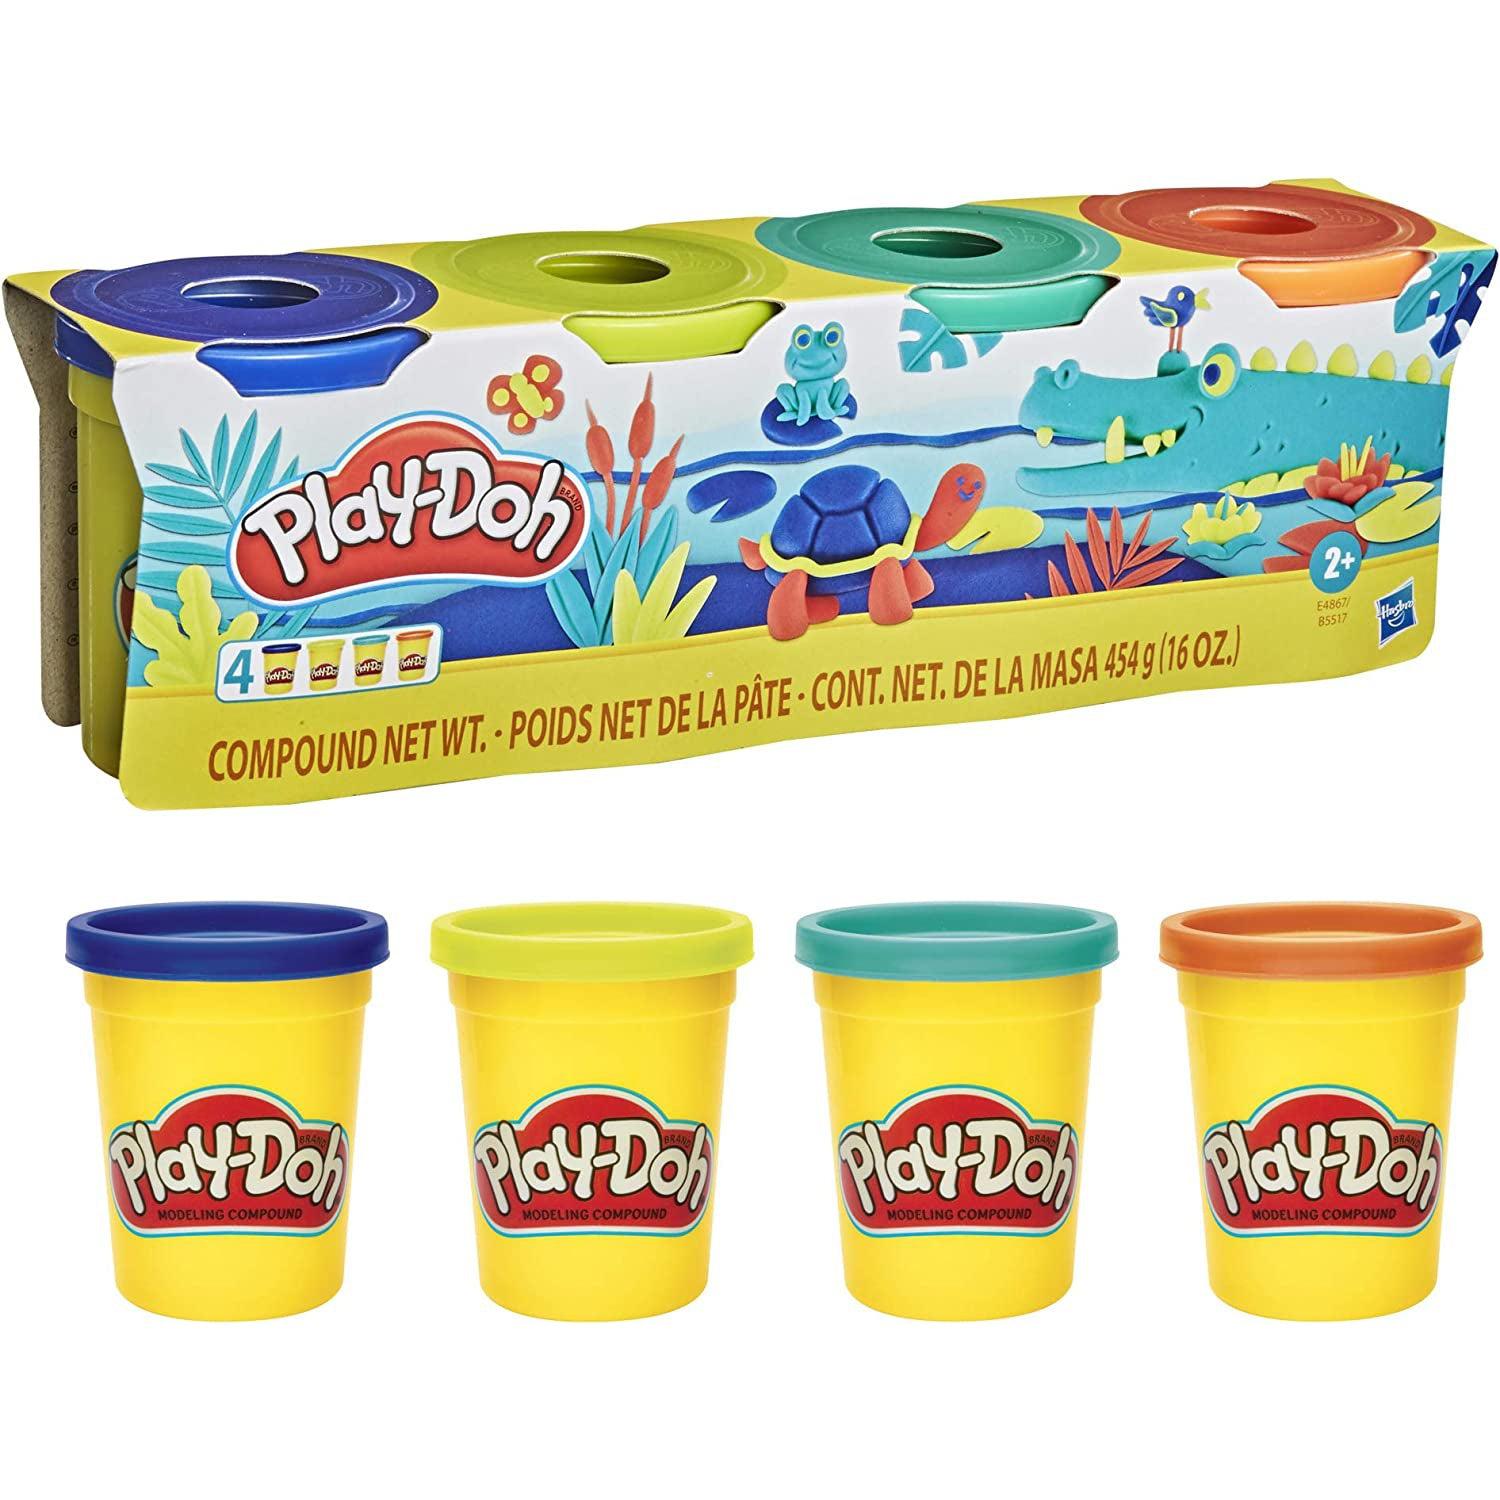 Baby Products Online - Play-Doh Bulk Non-Toxic Green Modeling